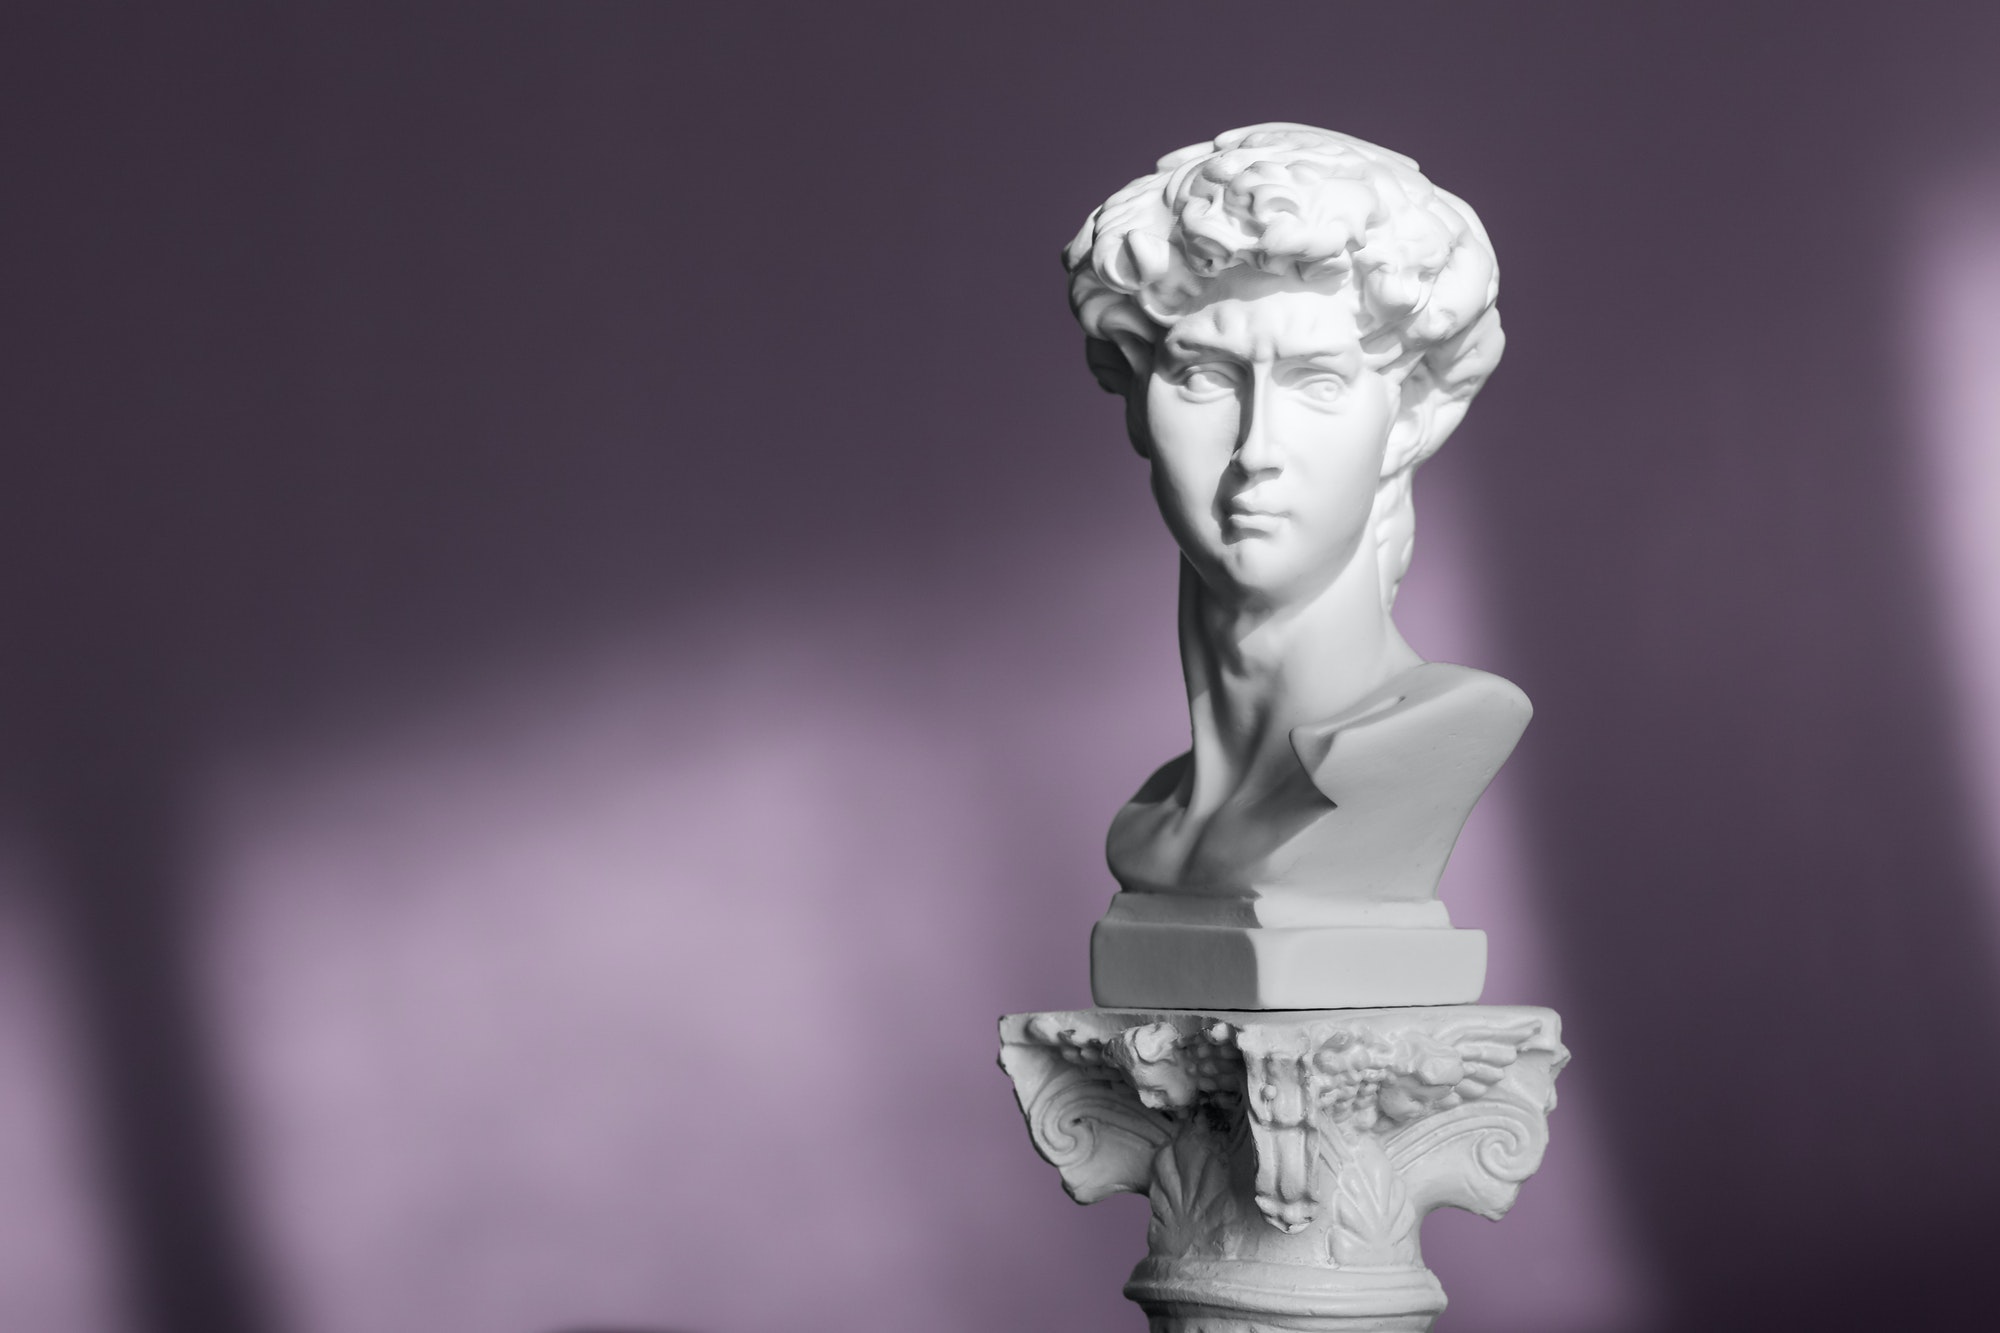 White marble head of young man, head of famous statue by Michelangelo - David from Florence. Gypsum